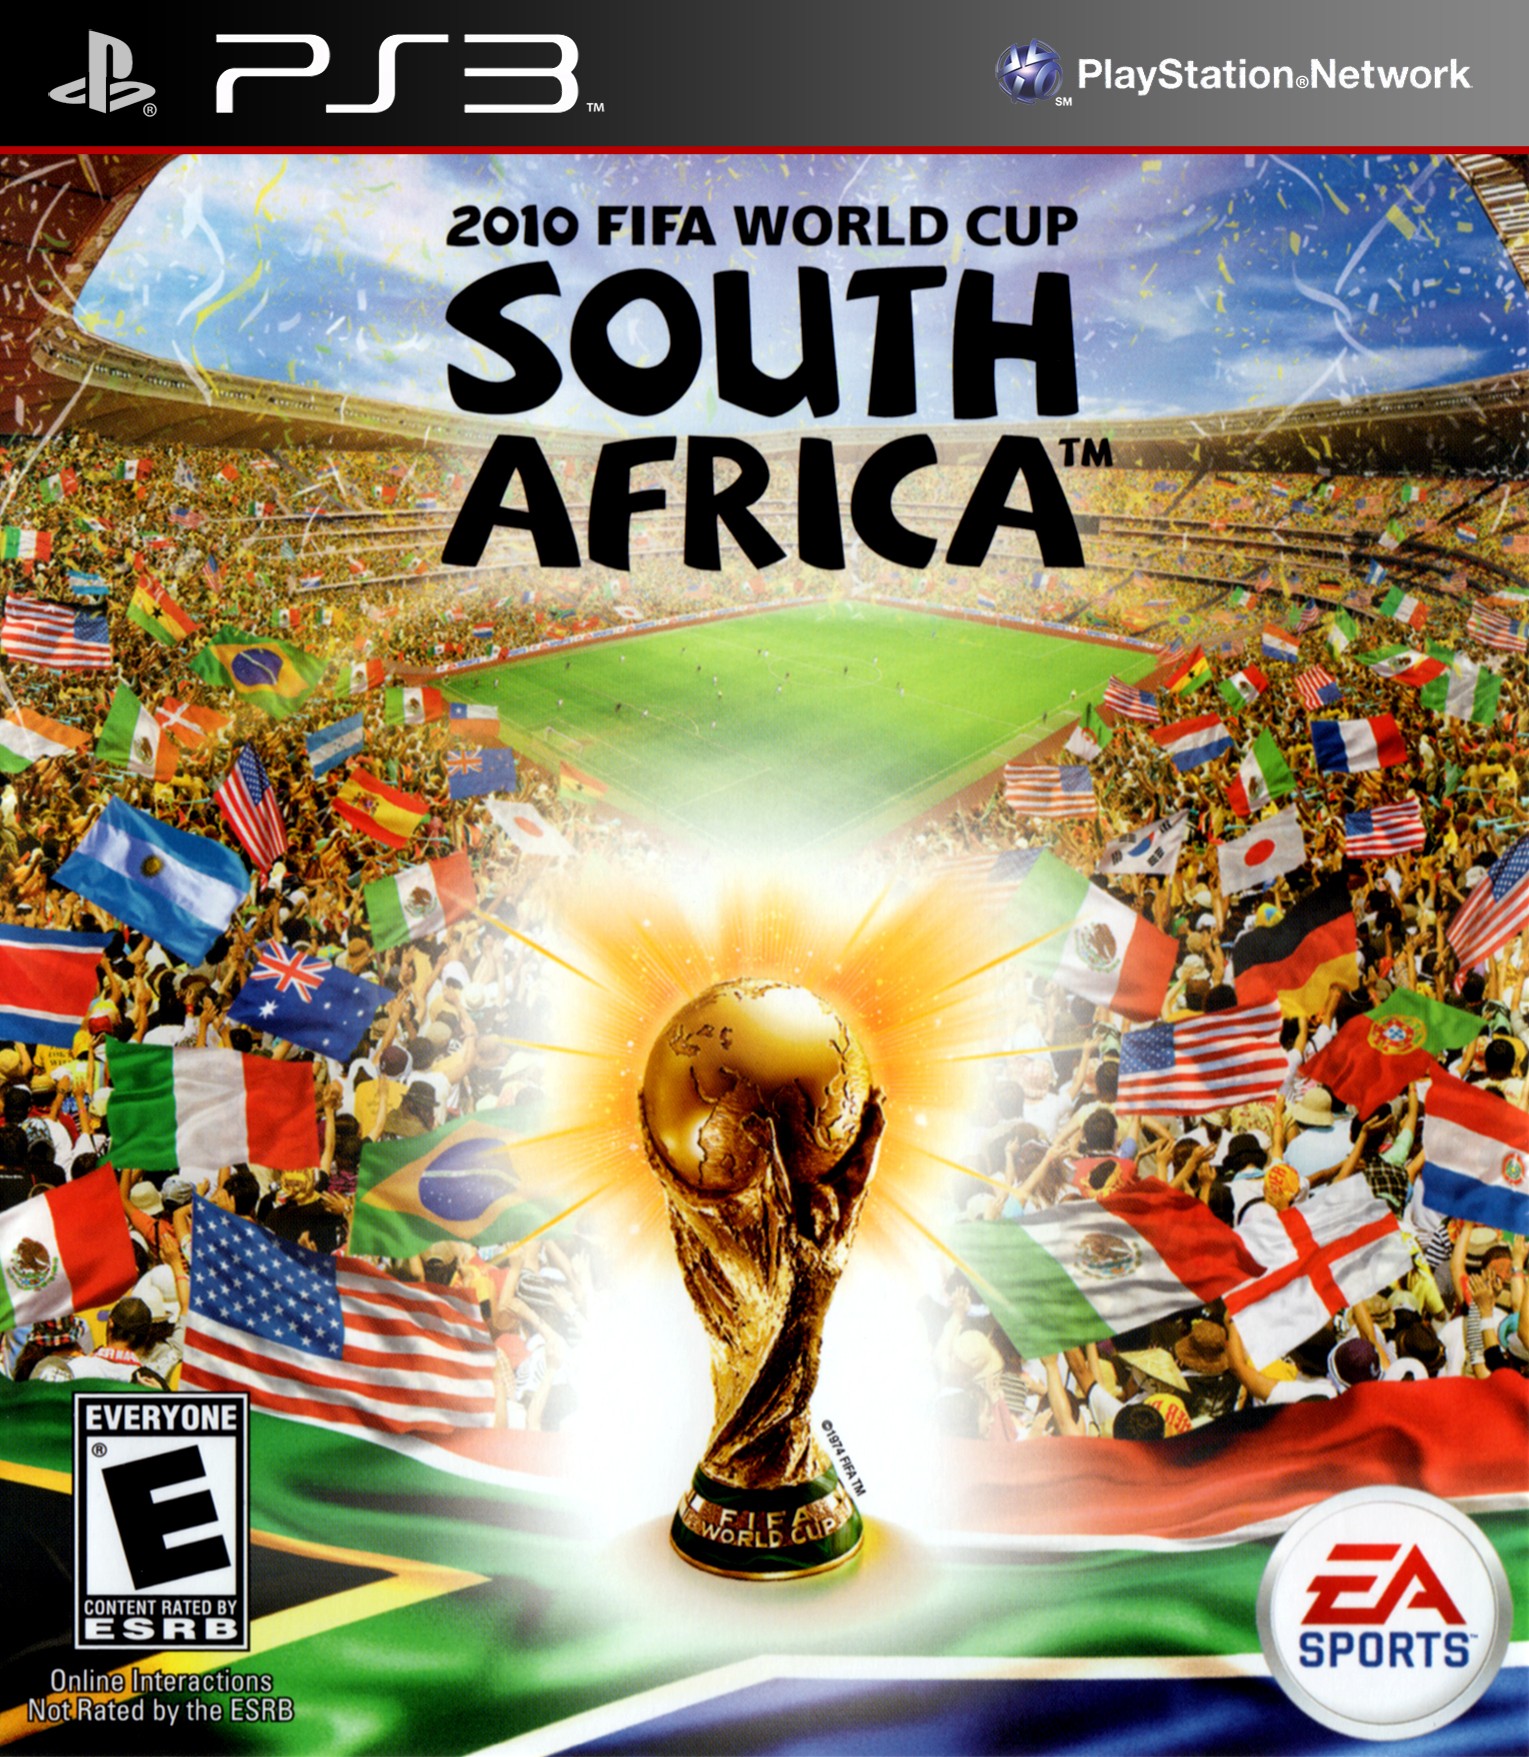 '2010 FIFA World Cup: South Africa'